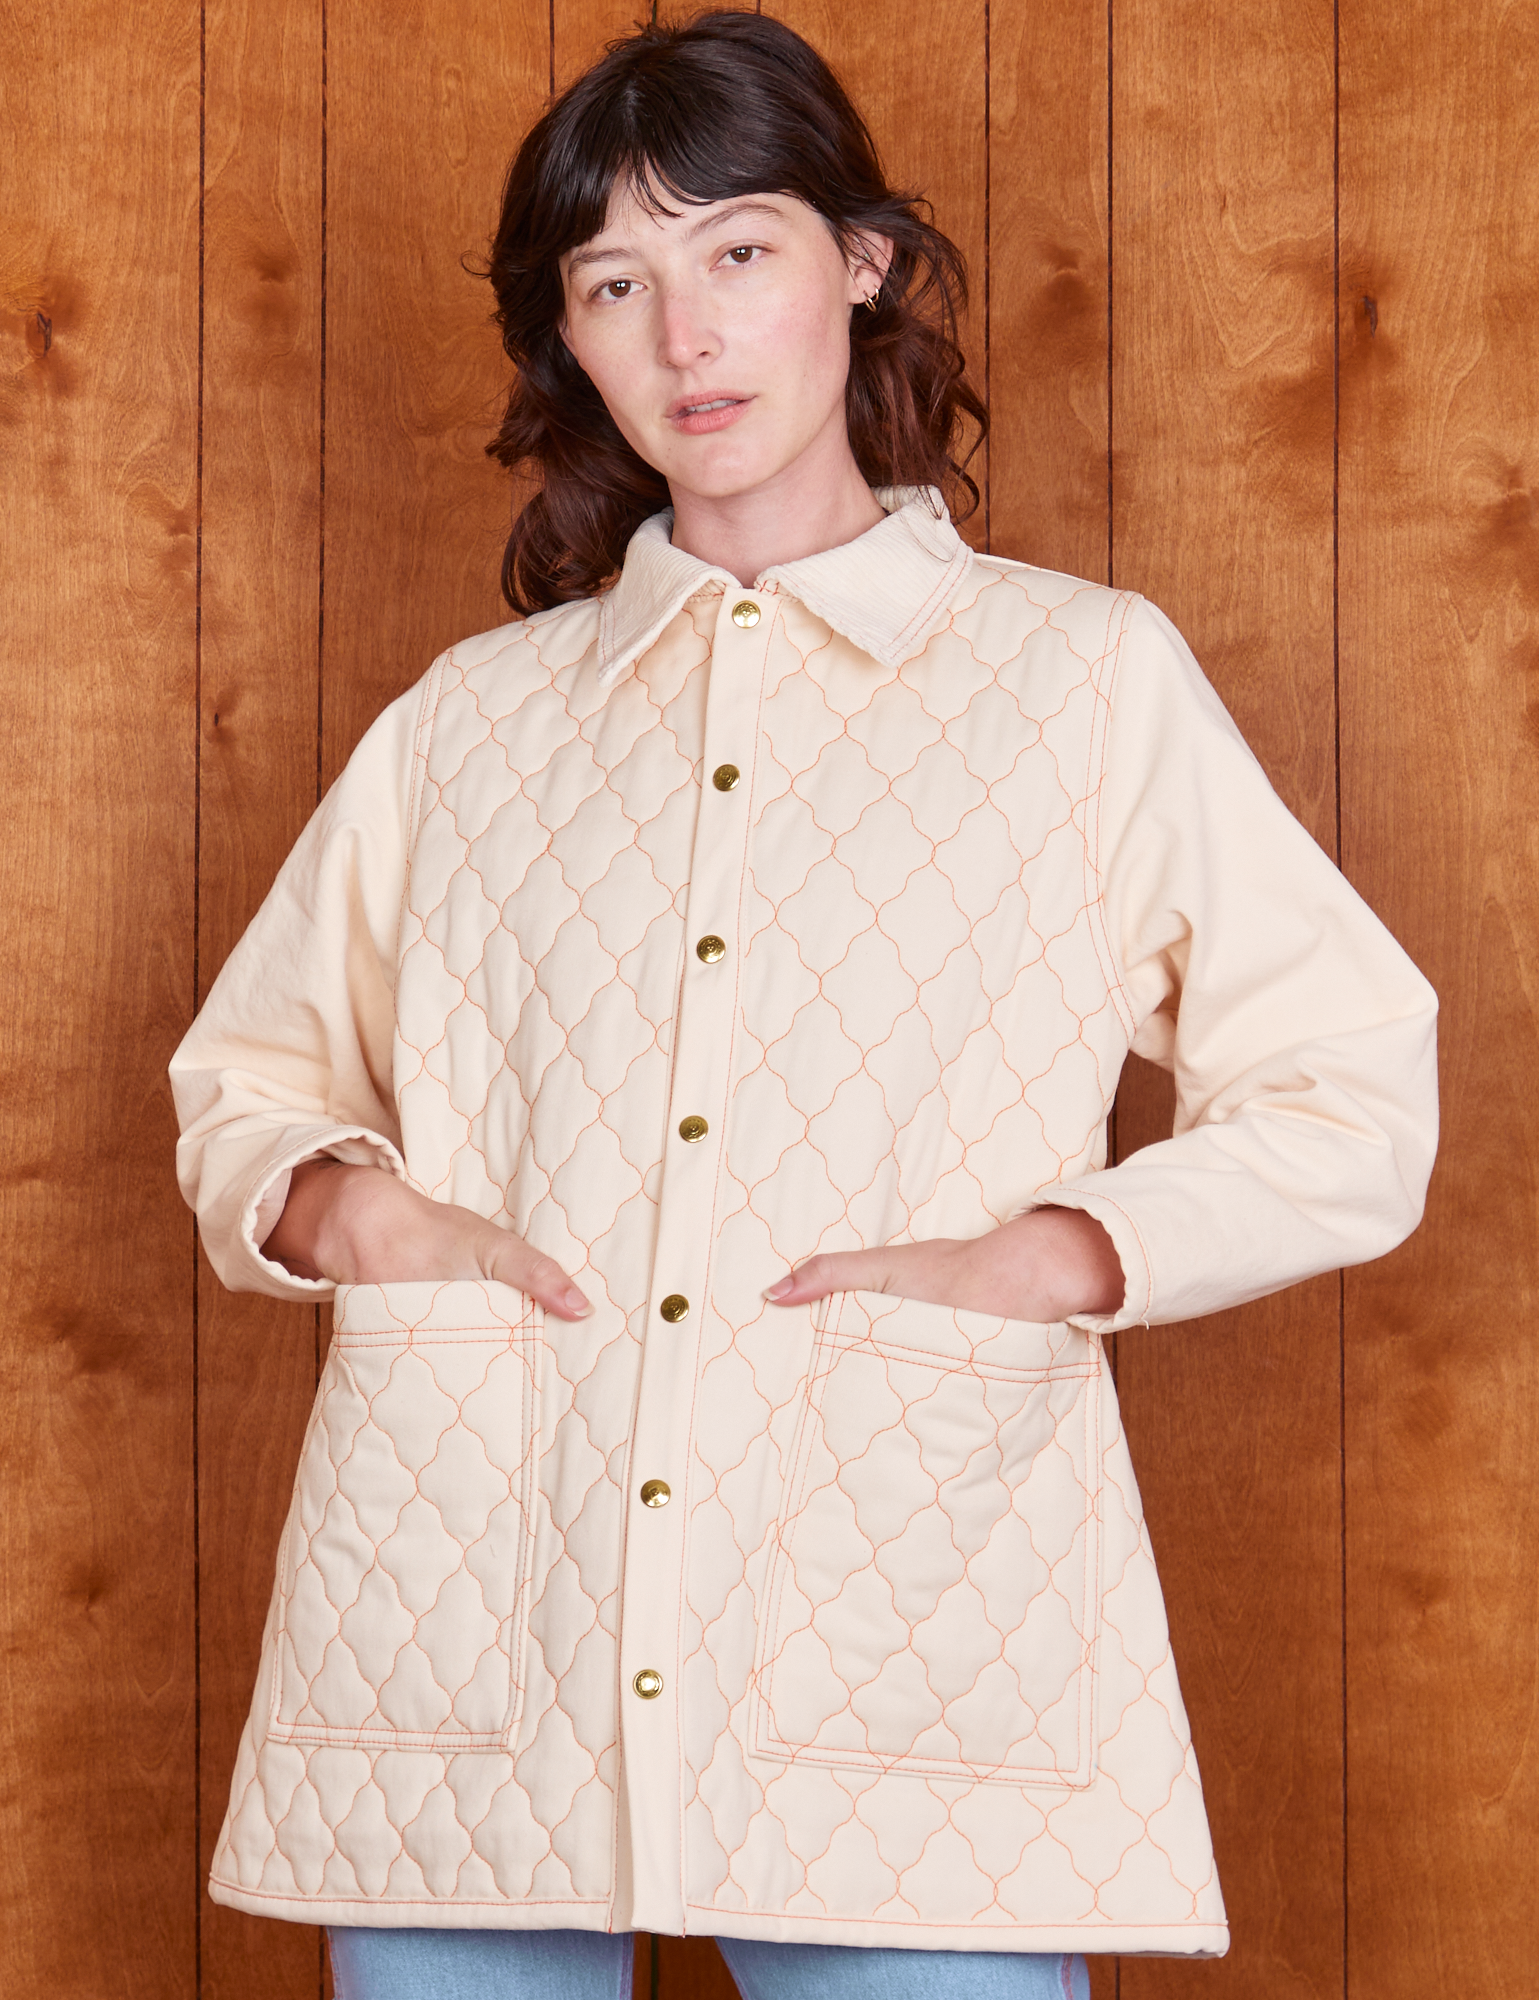 Alex is wearing a buttoned up Quilted Overcoat in Vintage Off-White. She has both her hands in the pockets.